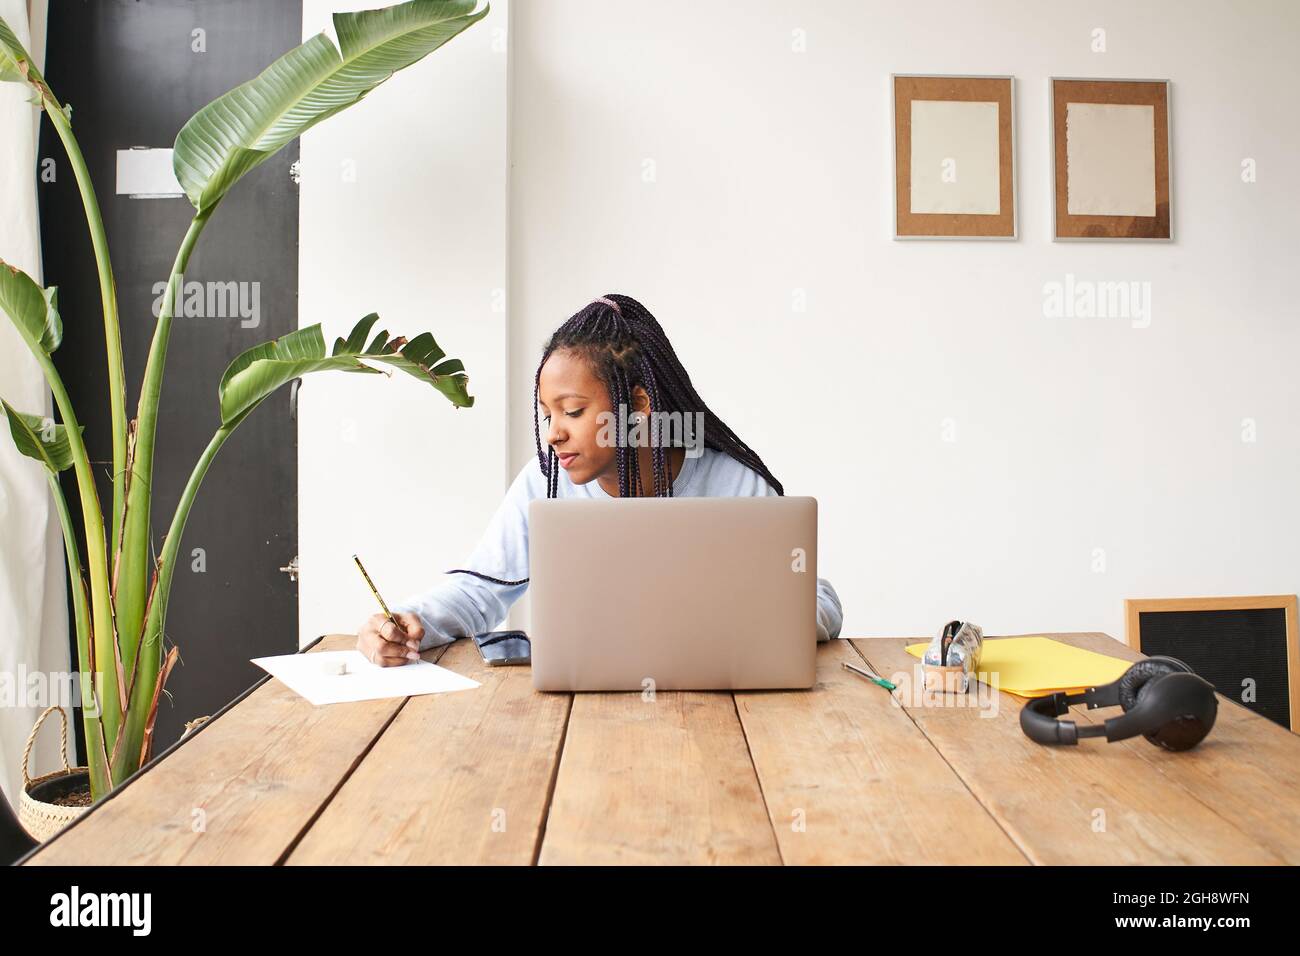 A young African-American woman works alone. She is using a laptop and also taking notes in a notebook. Concept of remote work. Stock Photo